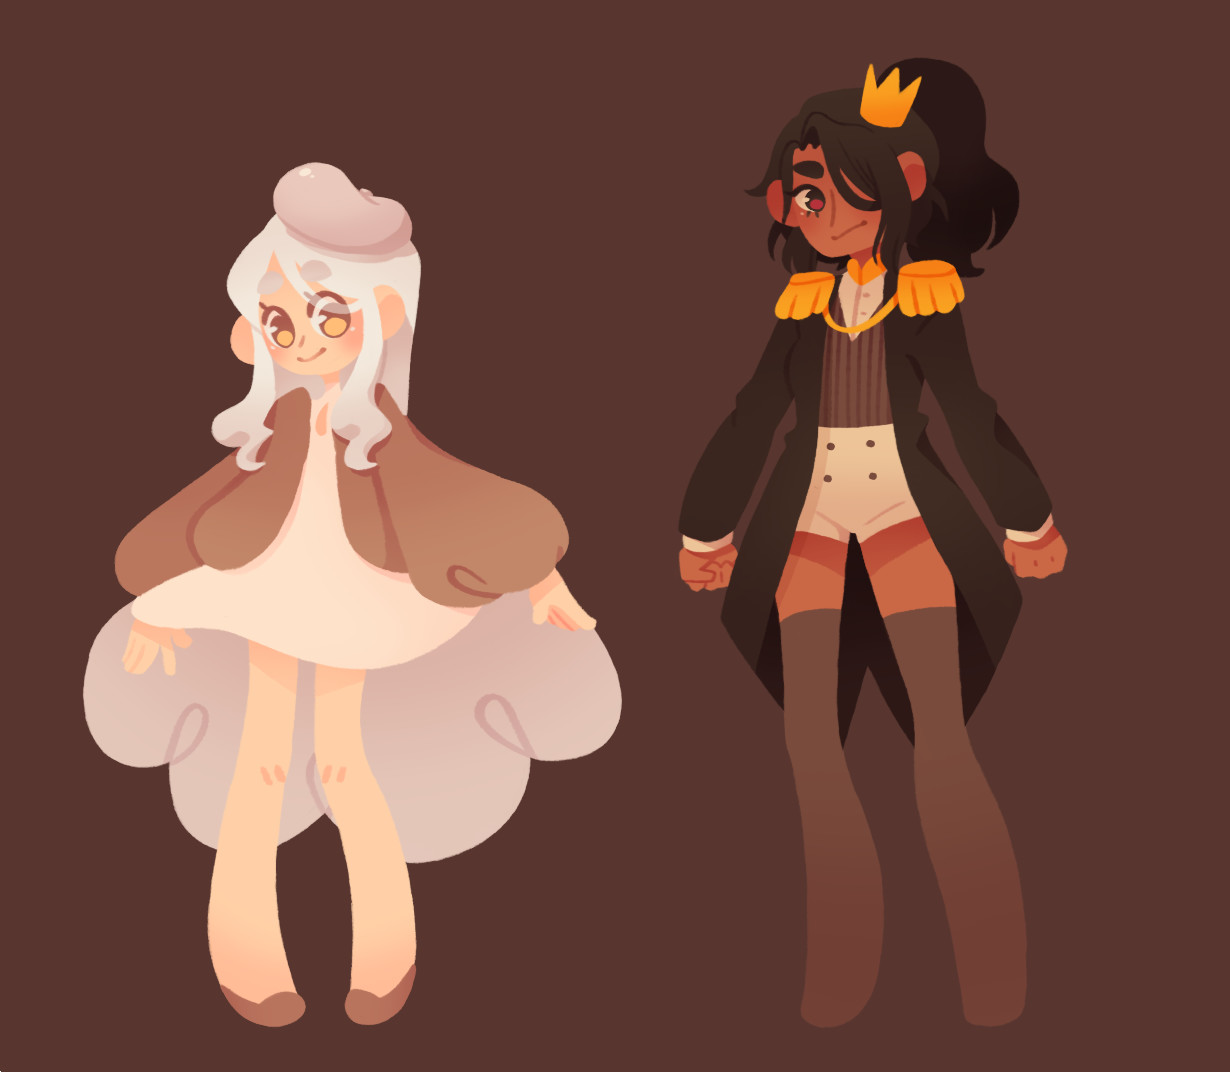 Character designs for Cream/Milk Tea (left) and Coffee (right)